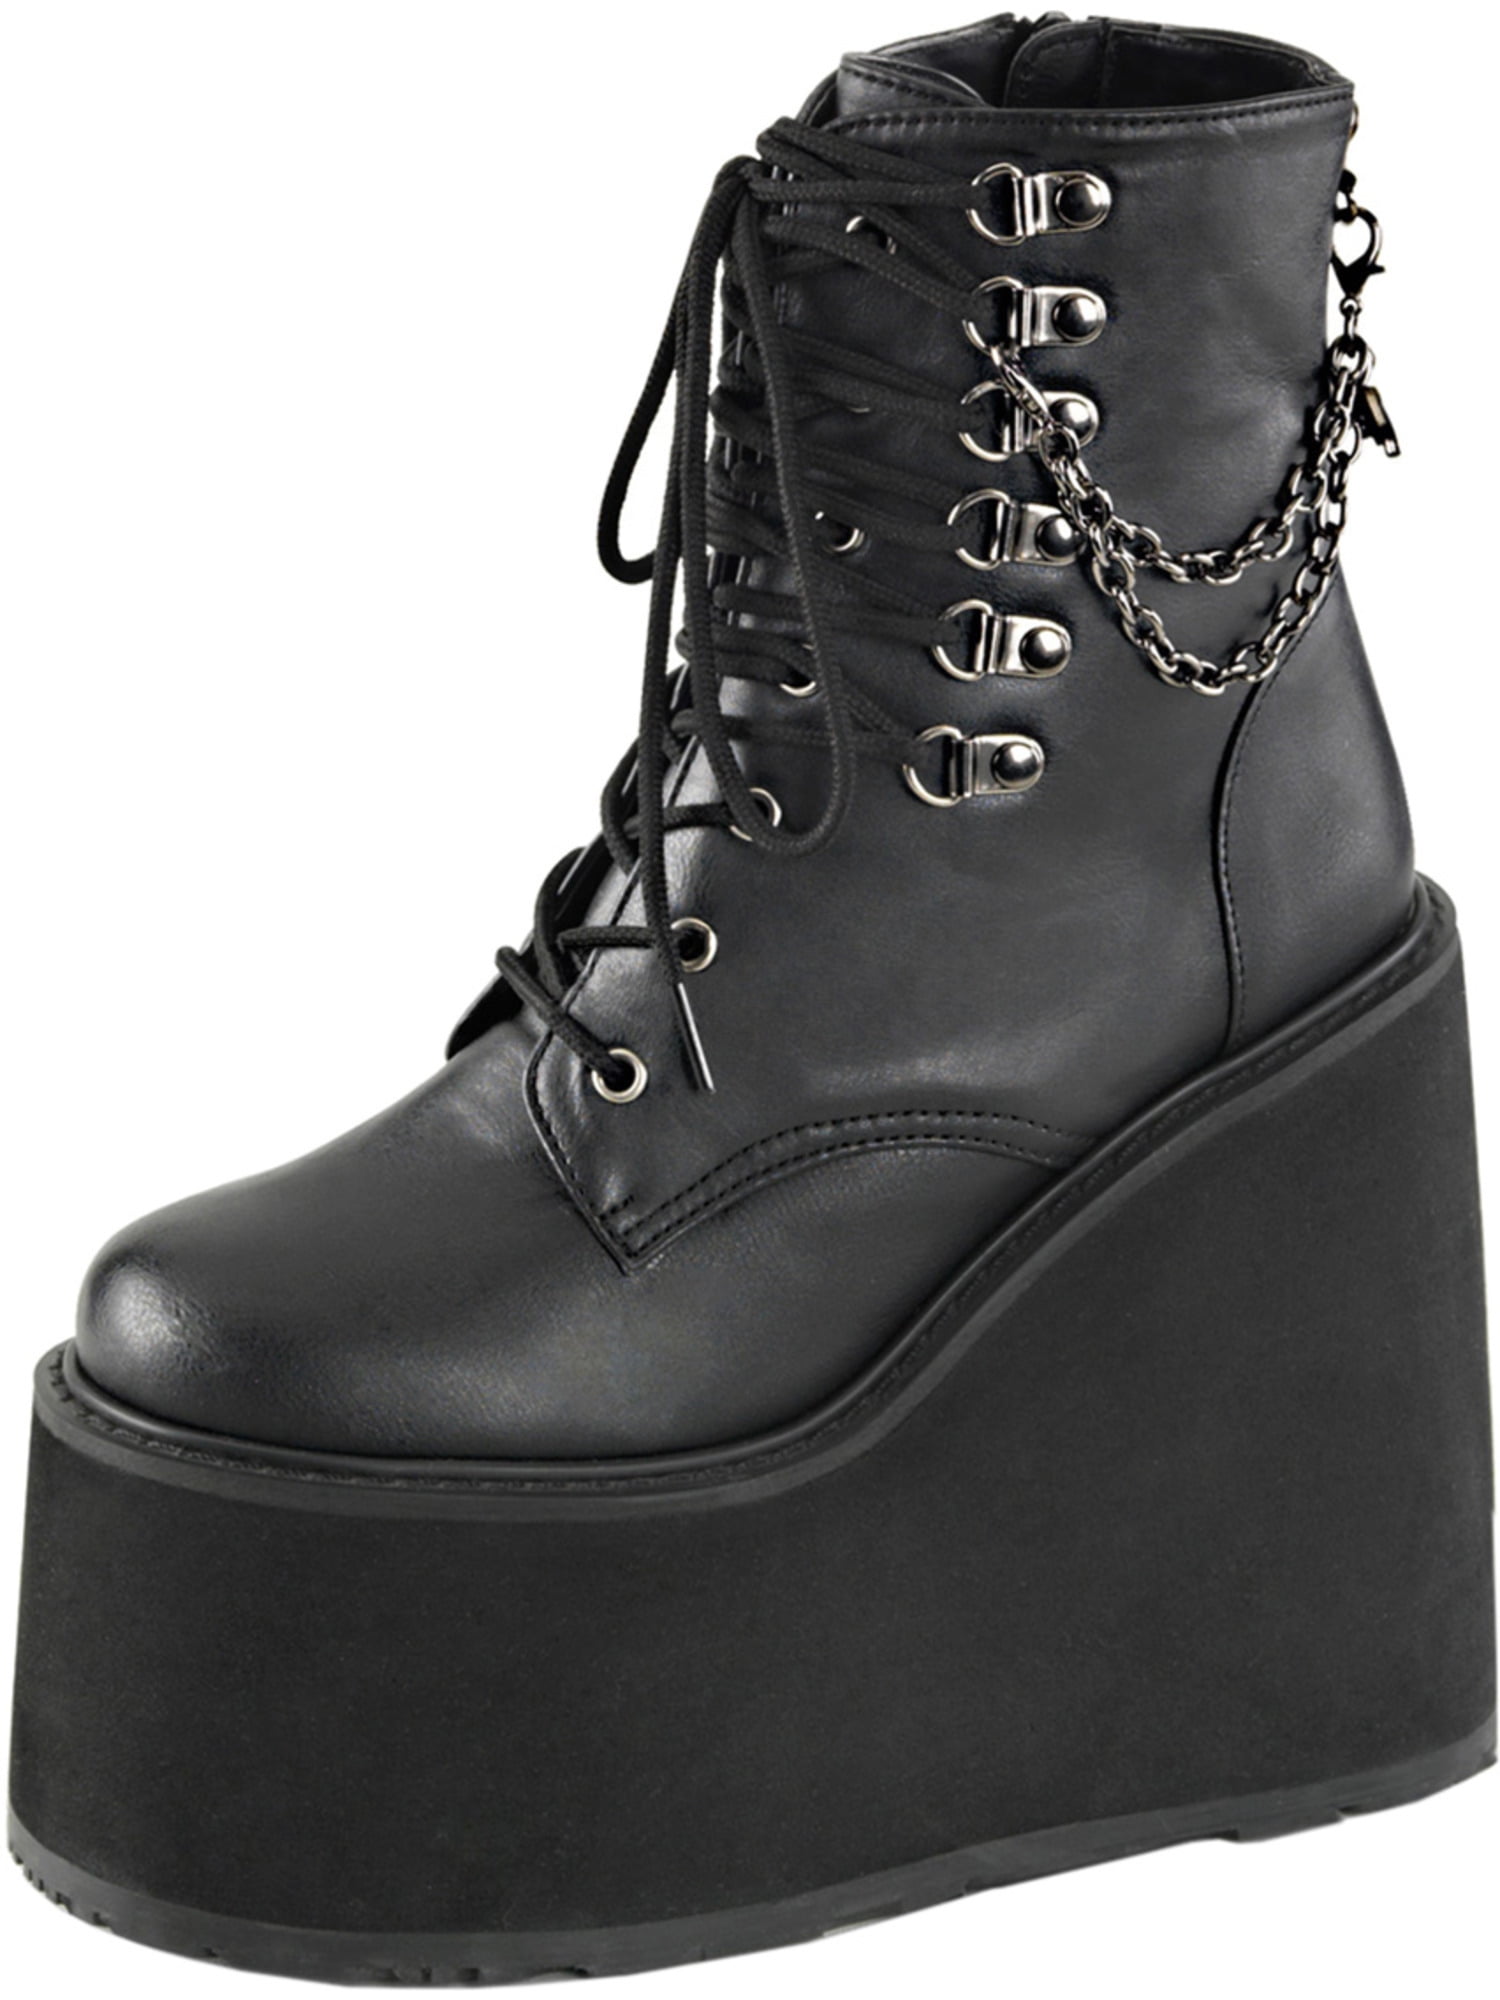 wedges black boots